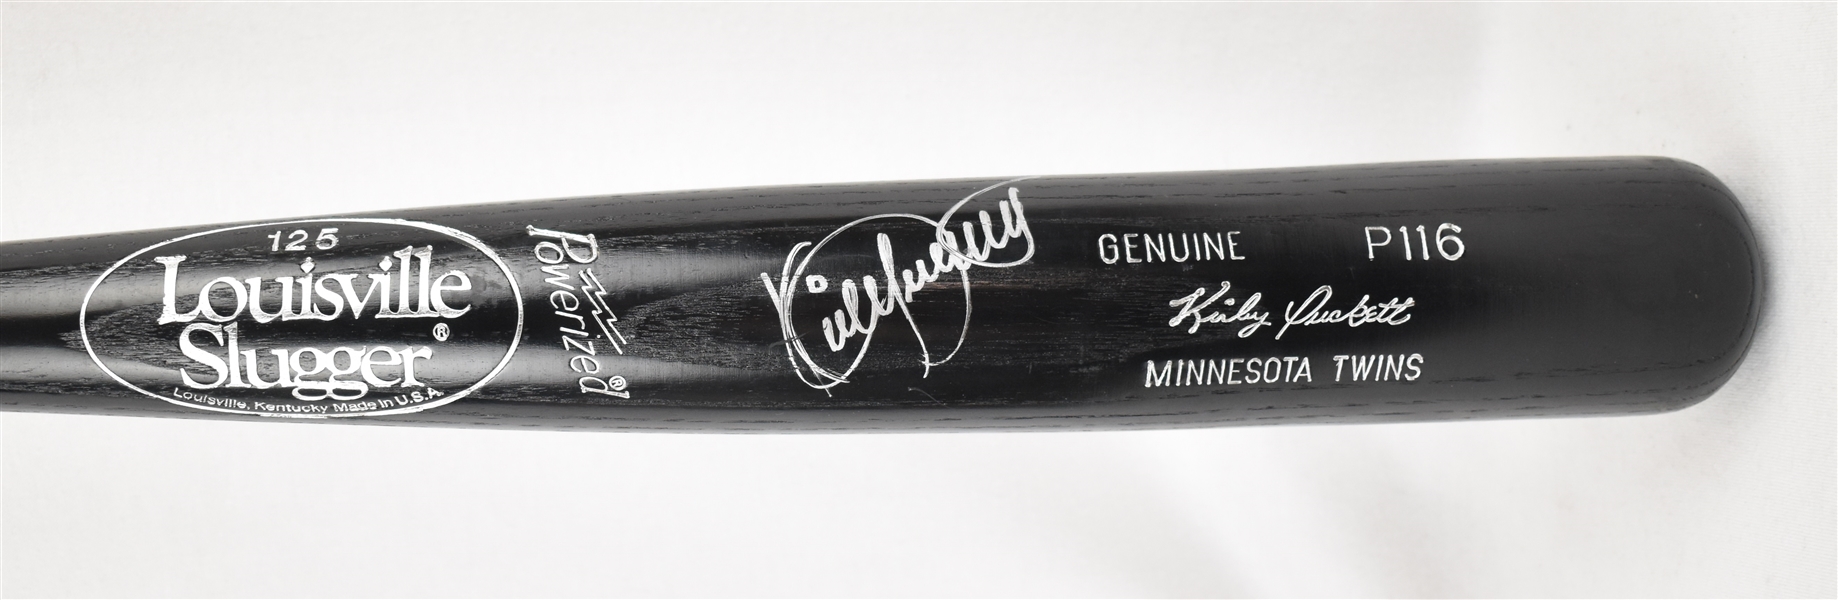 Kirby Puckett Autographed Signature Model Bat in Silver Marker w/Puckett Family Provenance